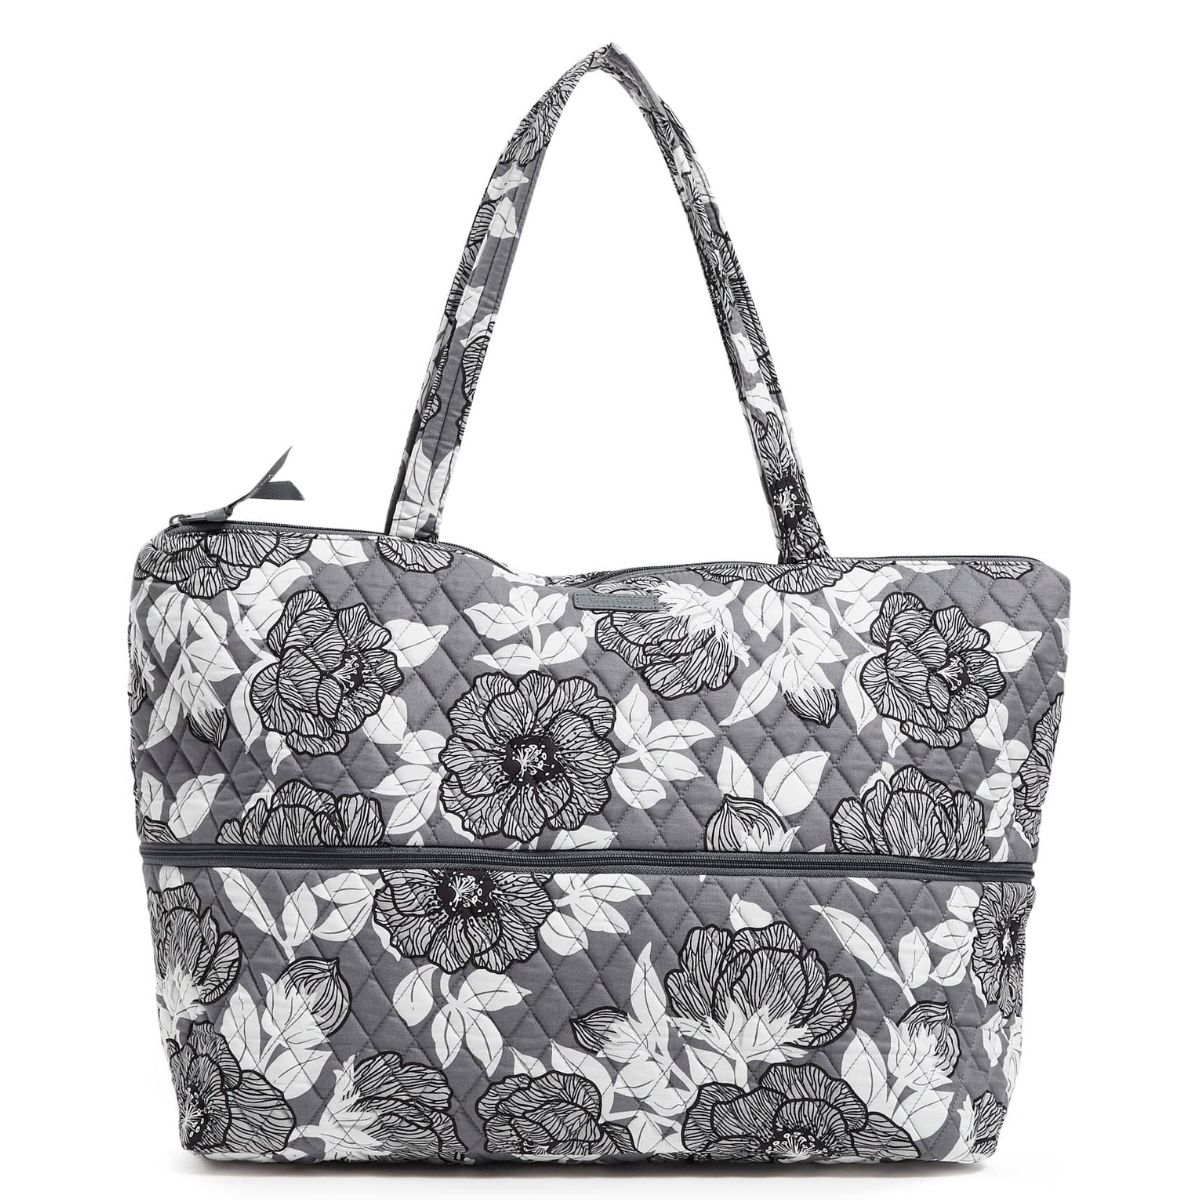 Totes On Sale Up To 90% Off Retail